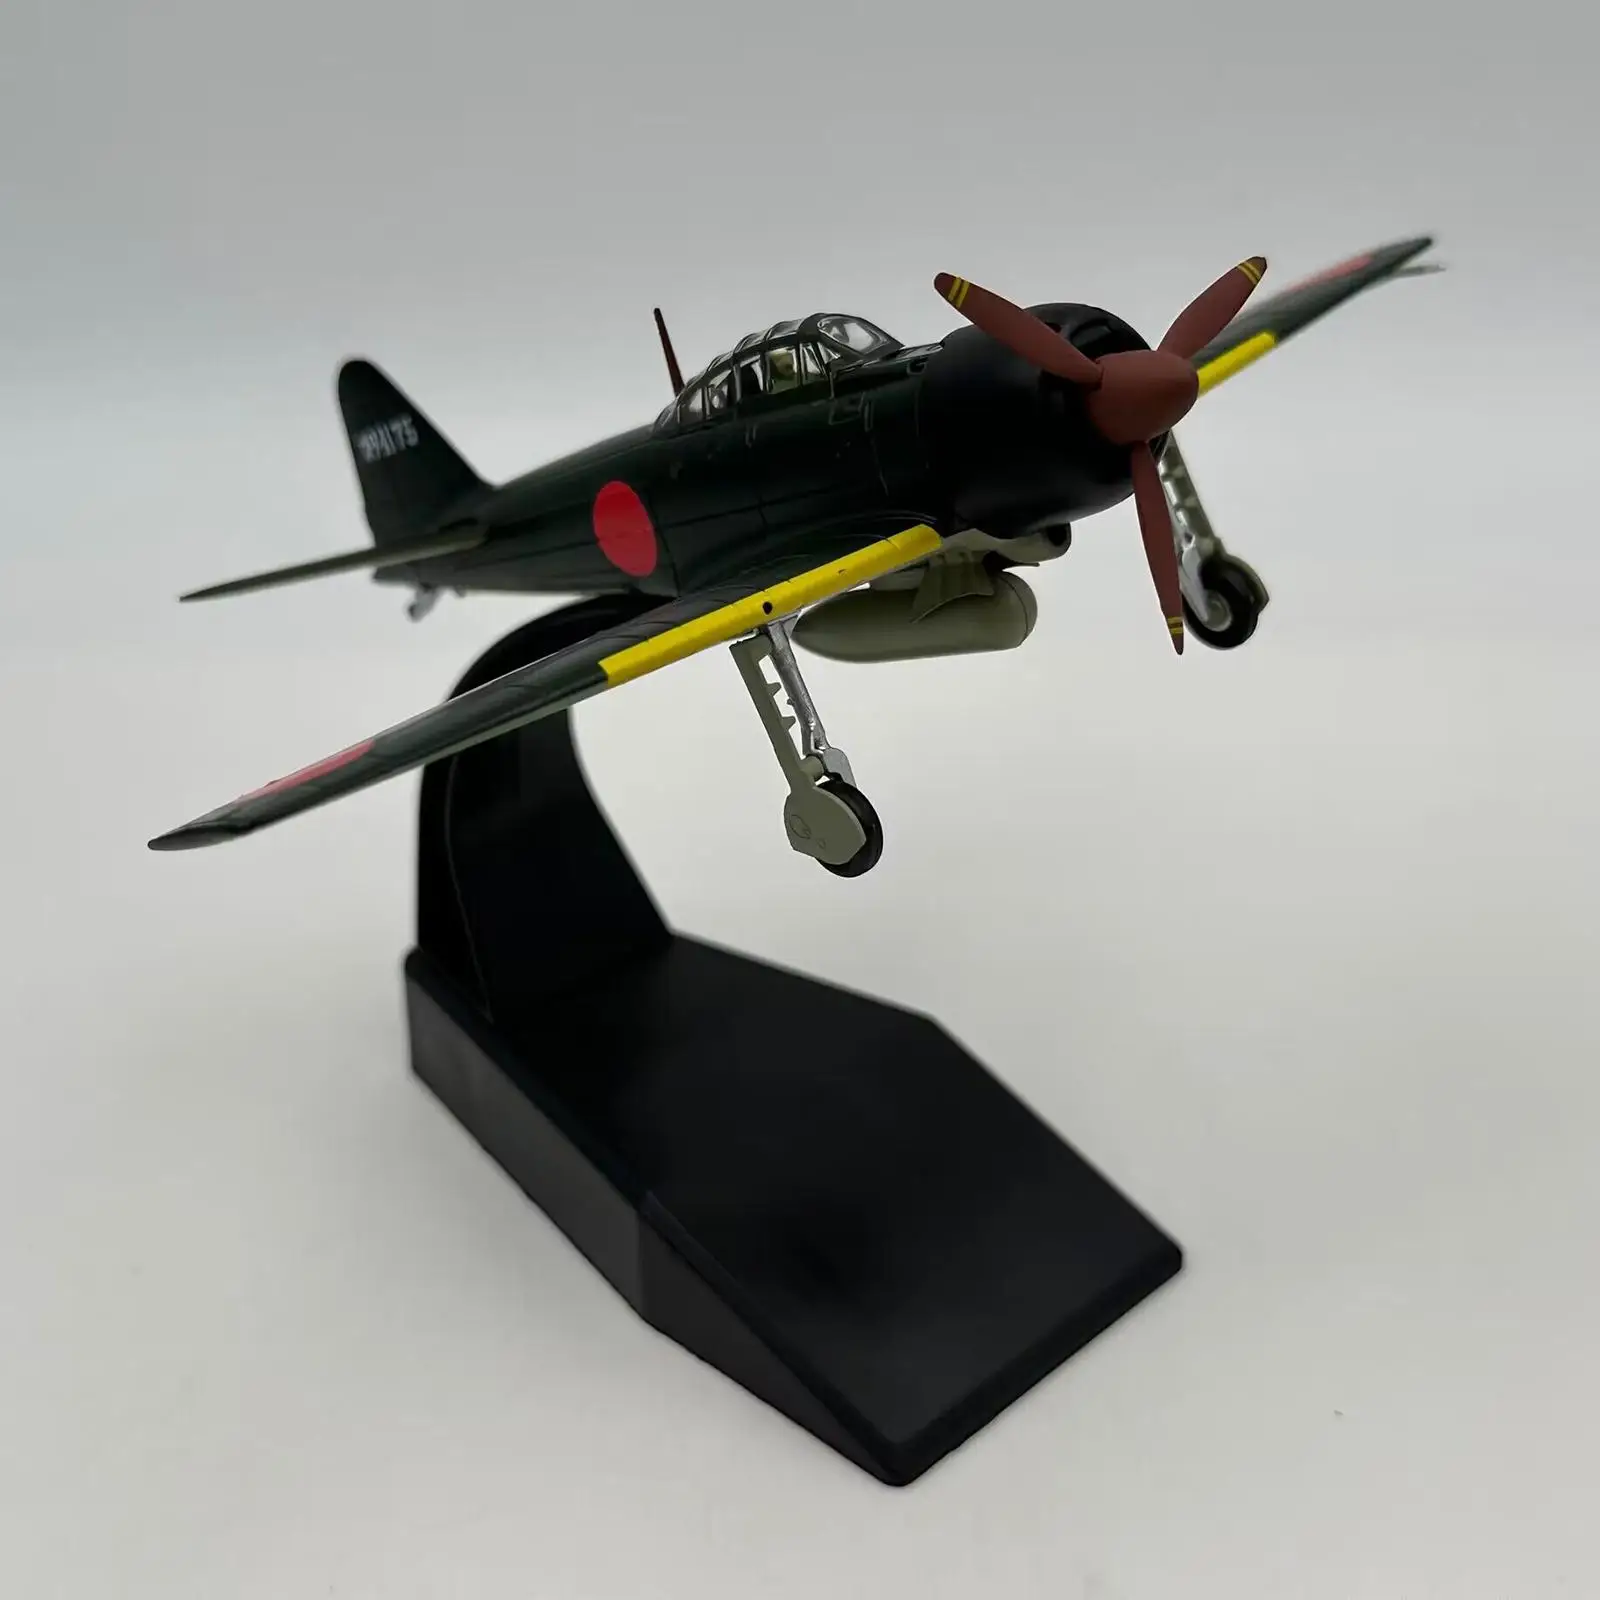 1/72 Scale Plane Model Display Ornaments Collection Playset Fighter Model for Table Desktop Office Souvenir